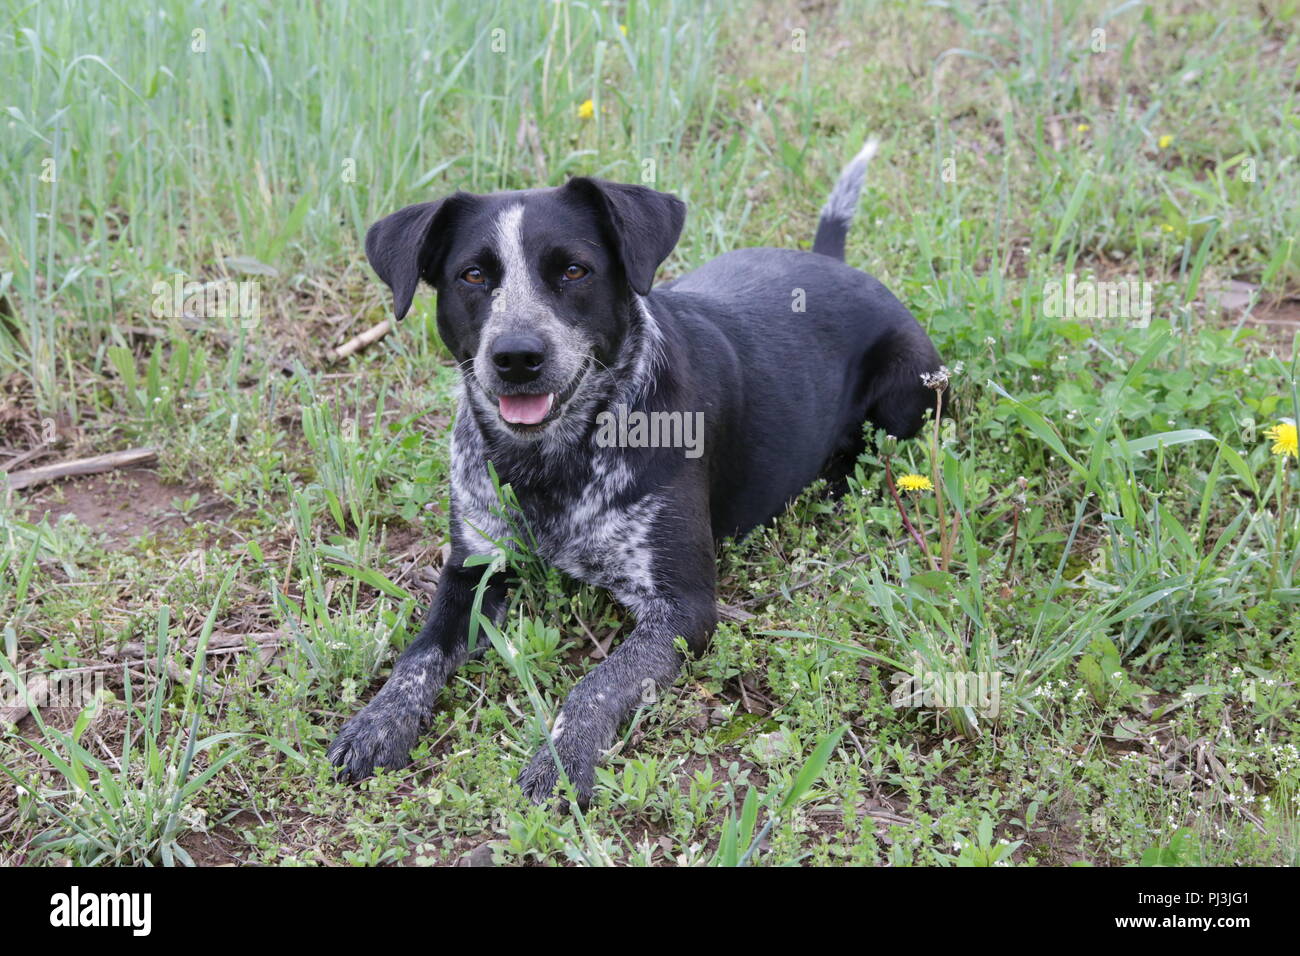 black and white dog in the grass Stock Photo